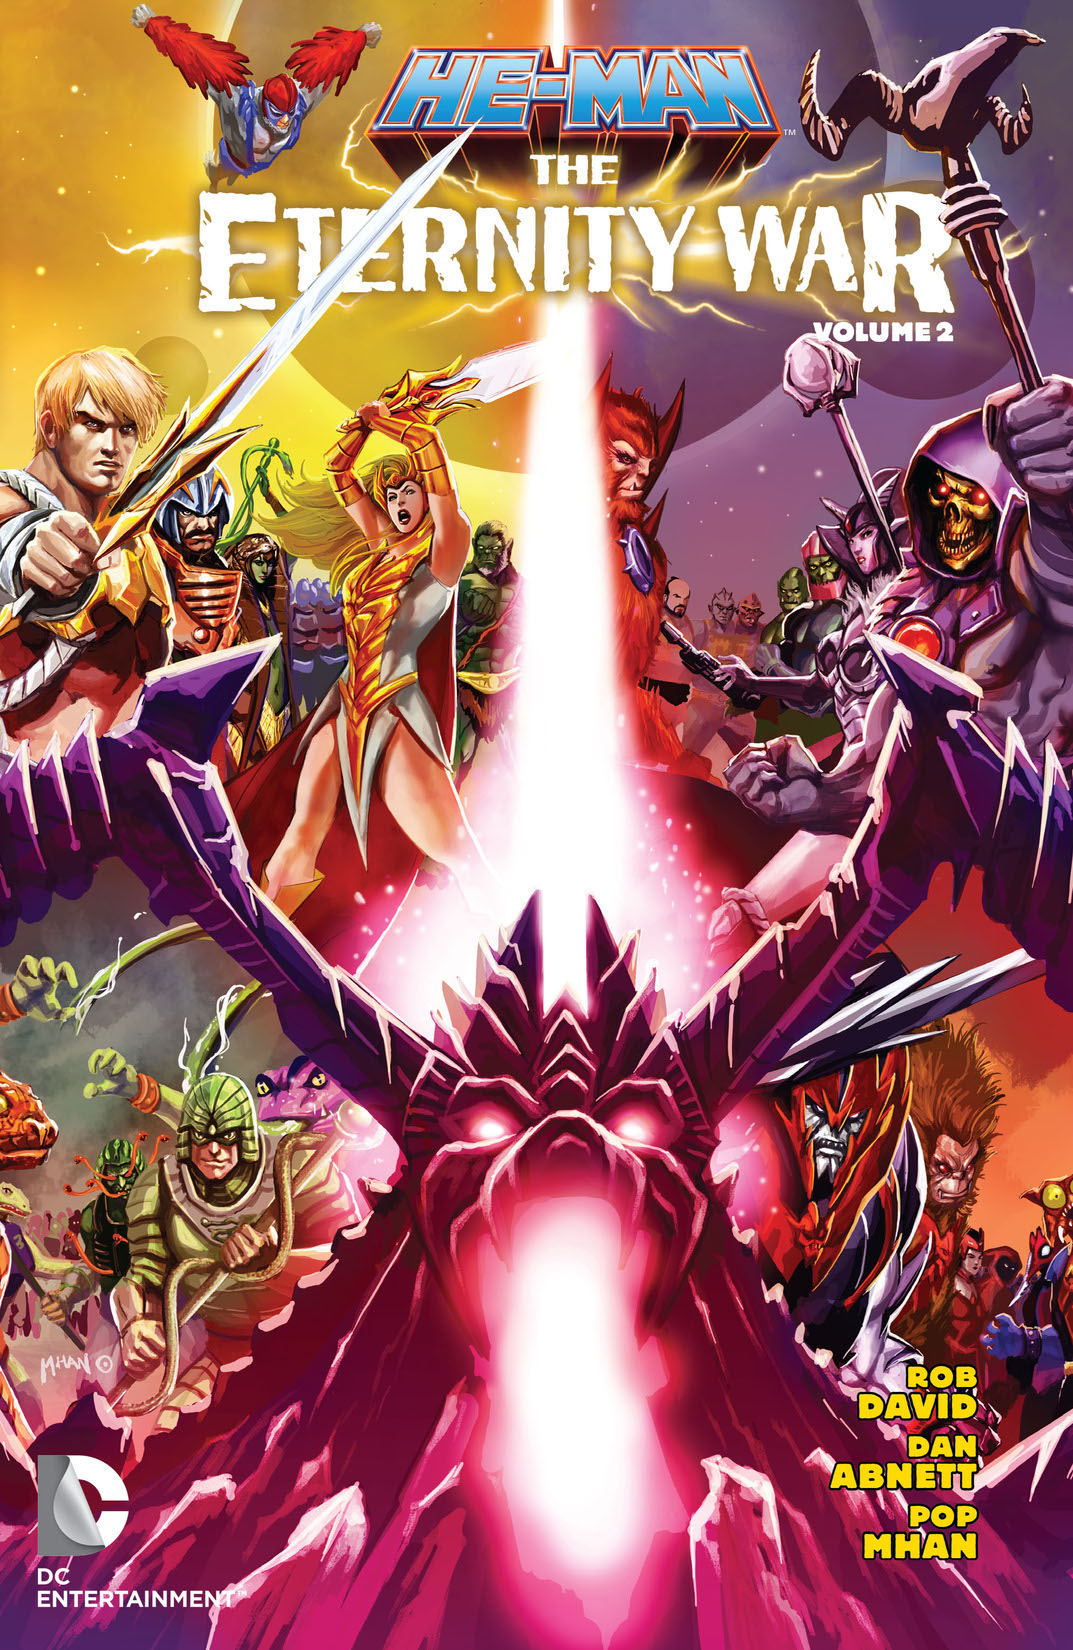 He-Man: The Eternity War Vol. 2 preview images